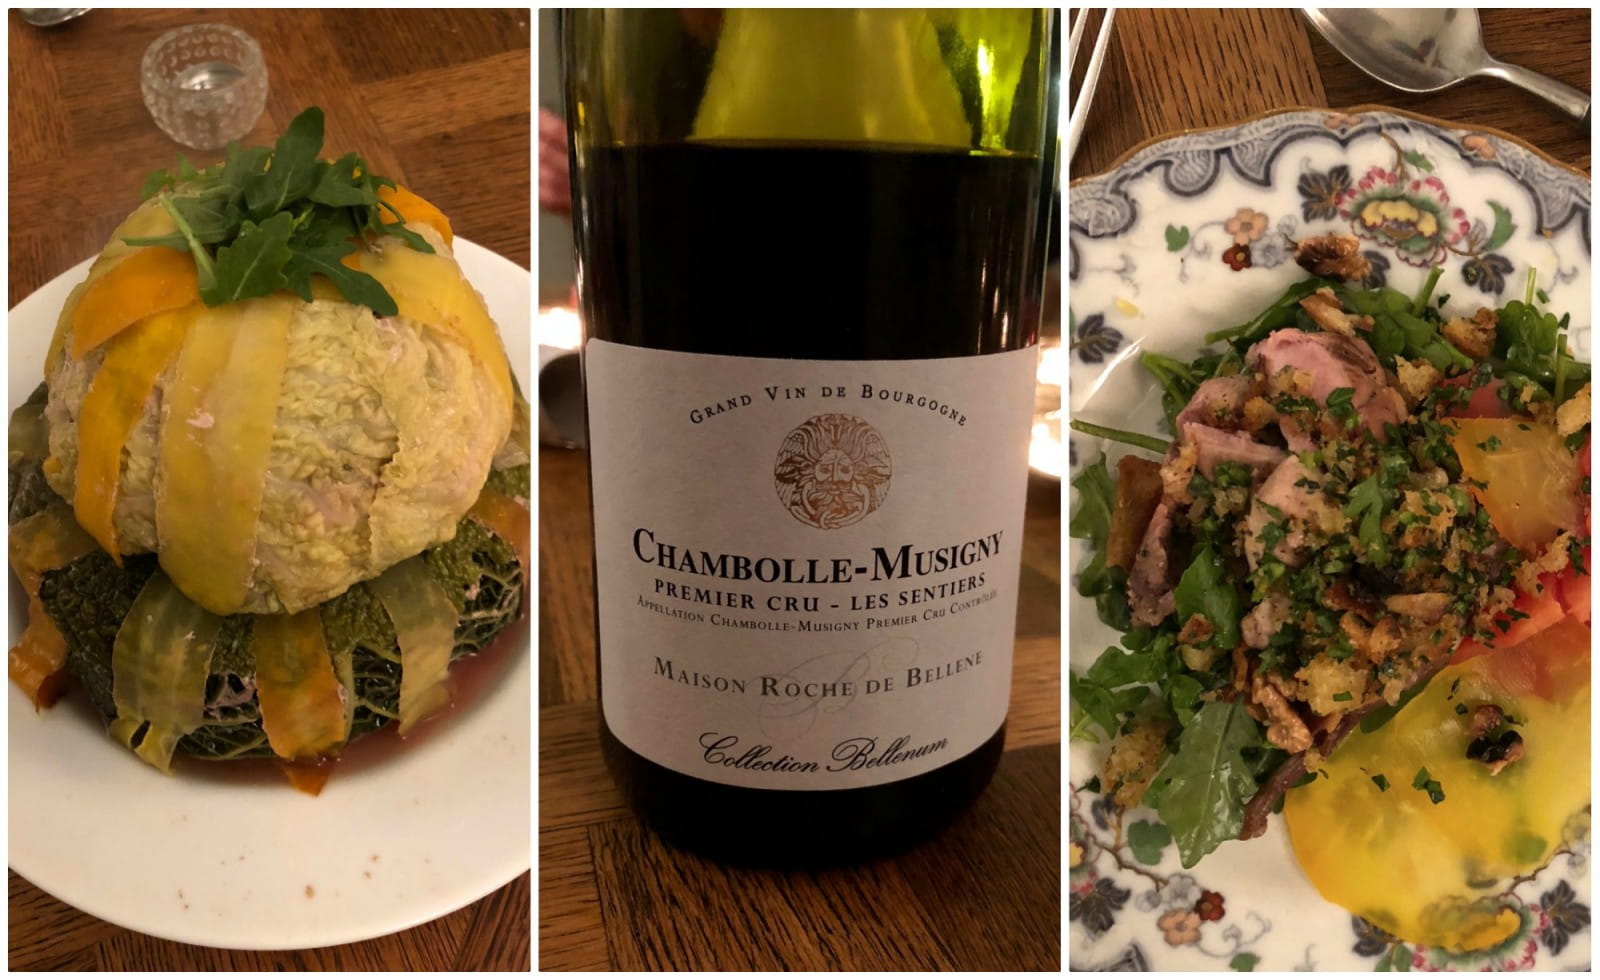 Chambolle-Musigny and game